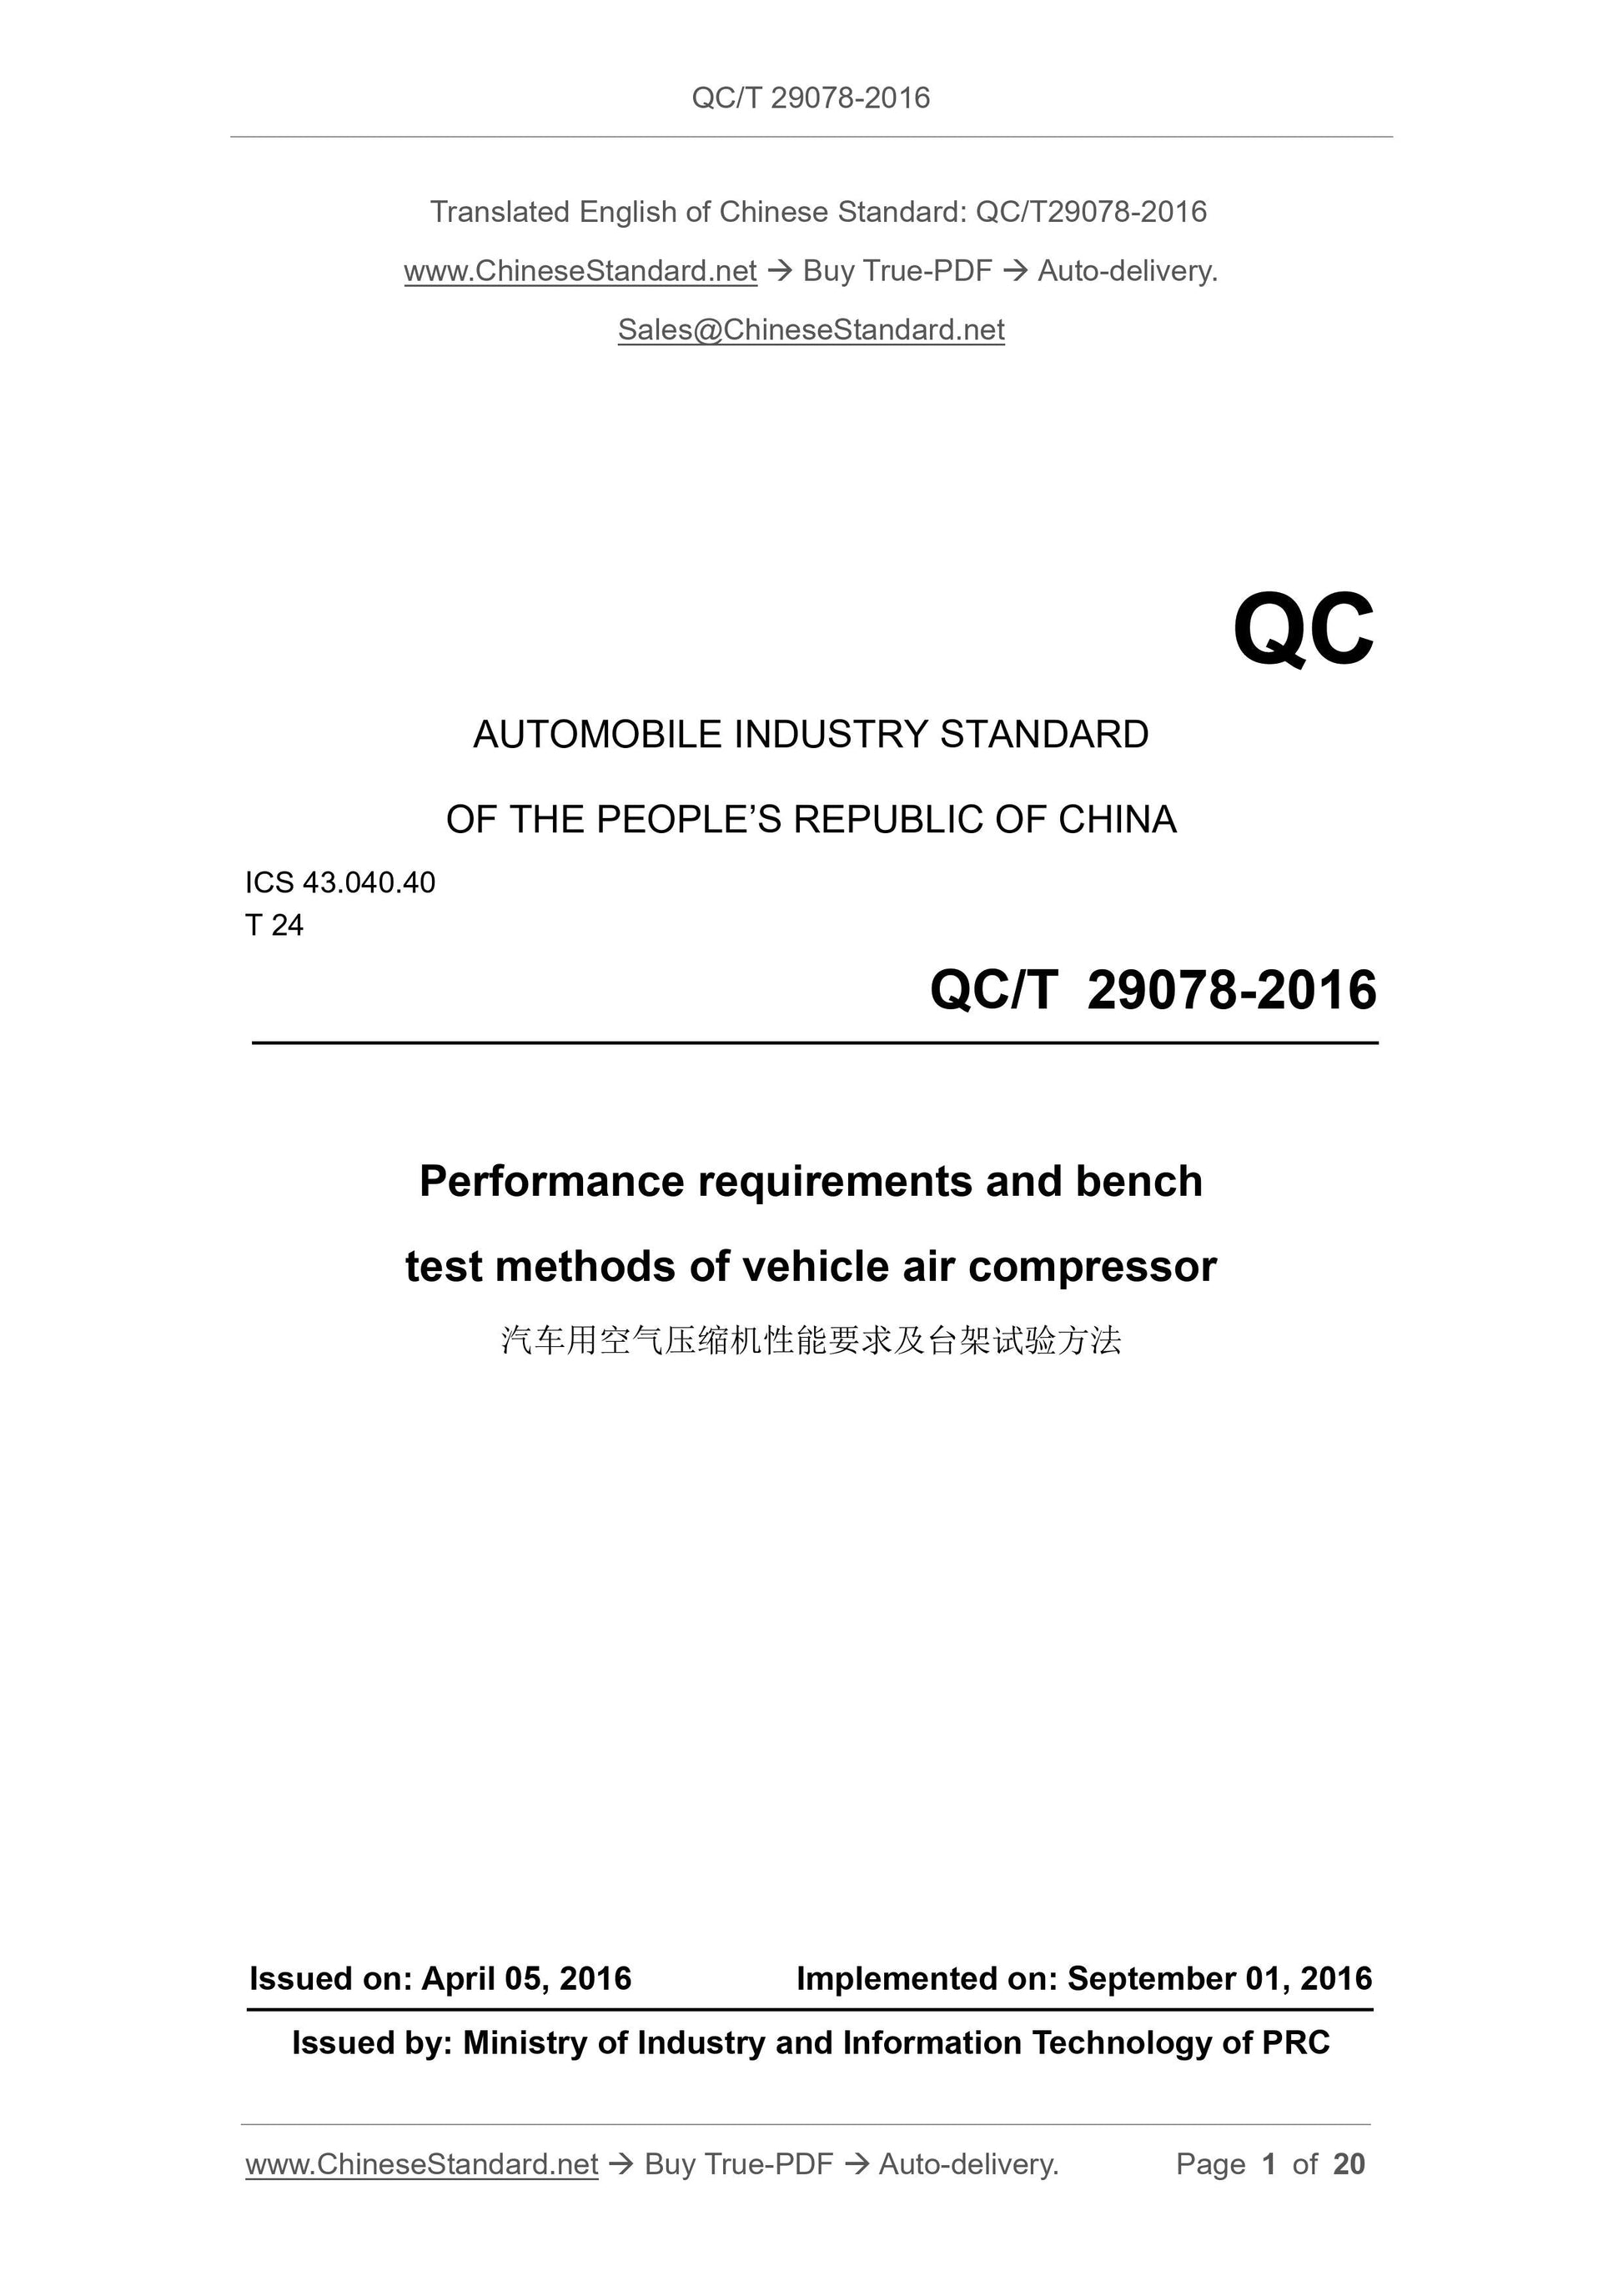 QC/T 29078-2016 Page 1